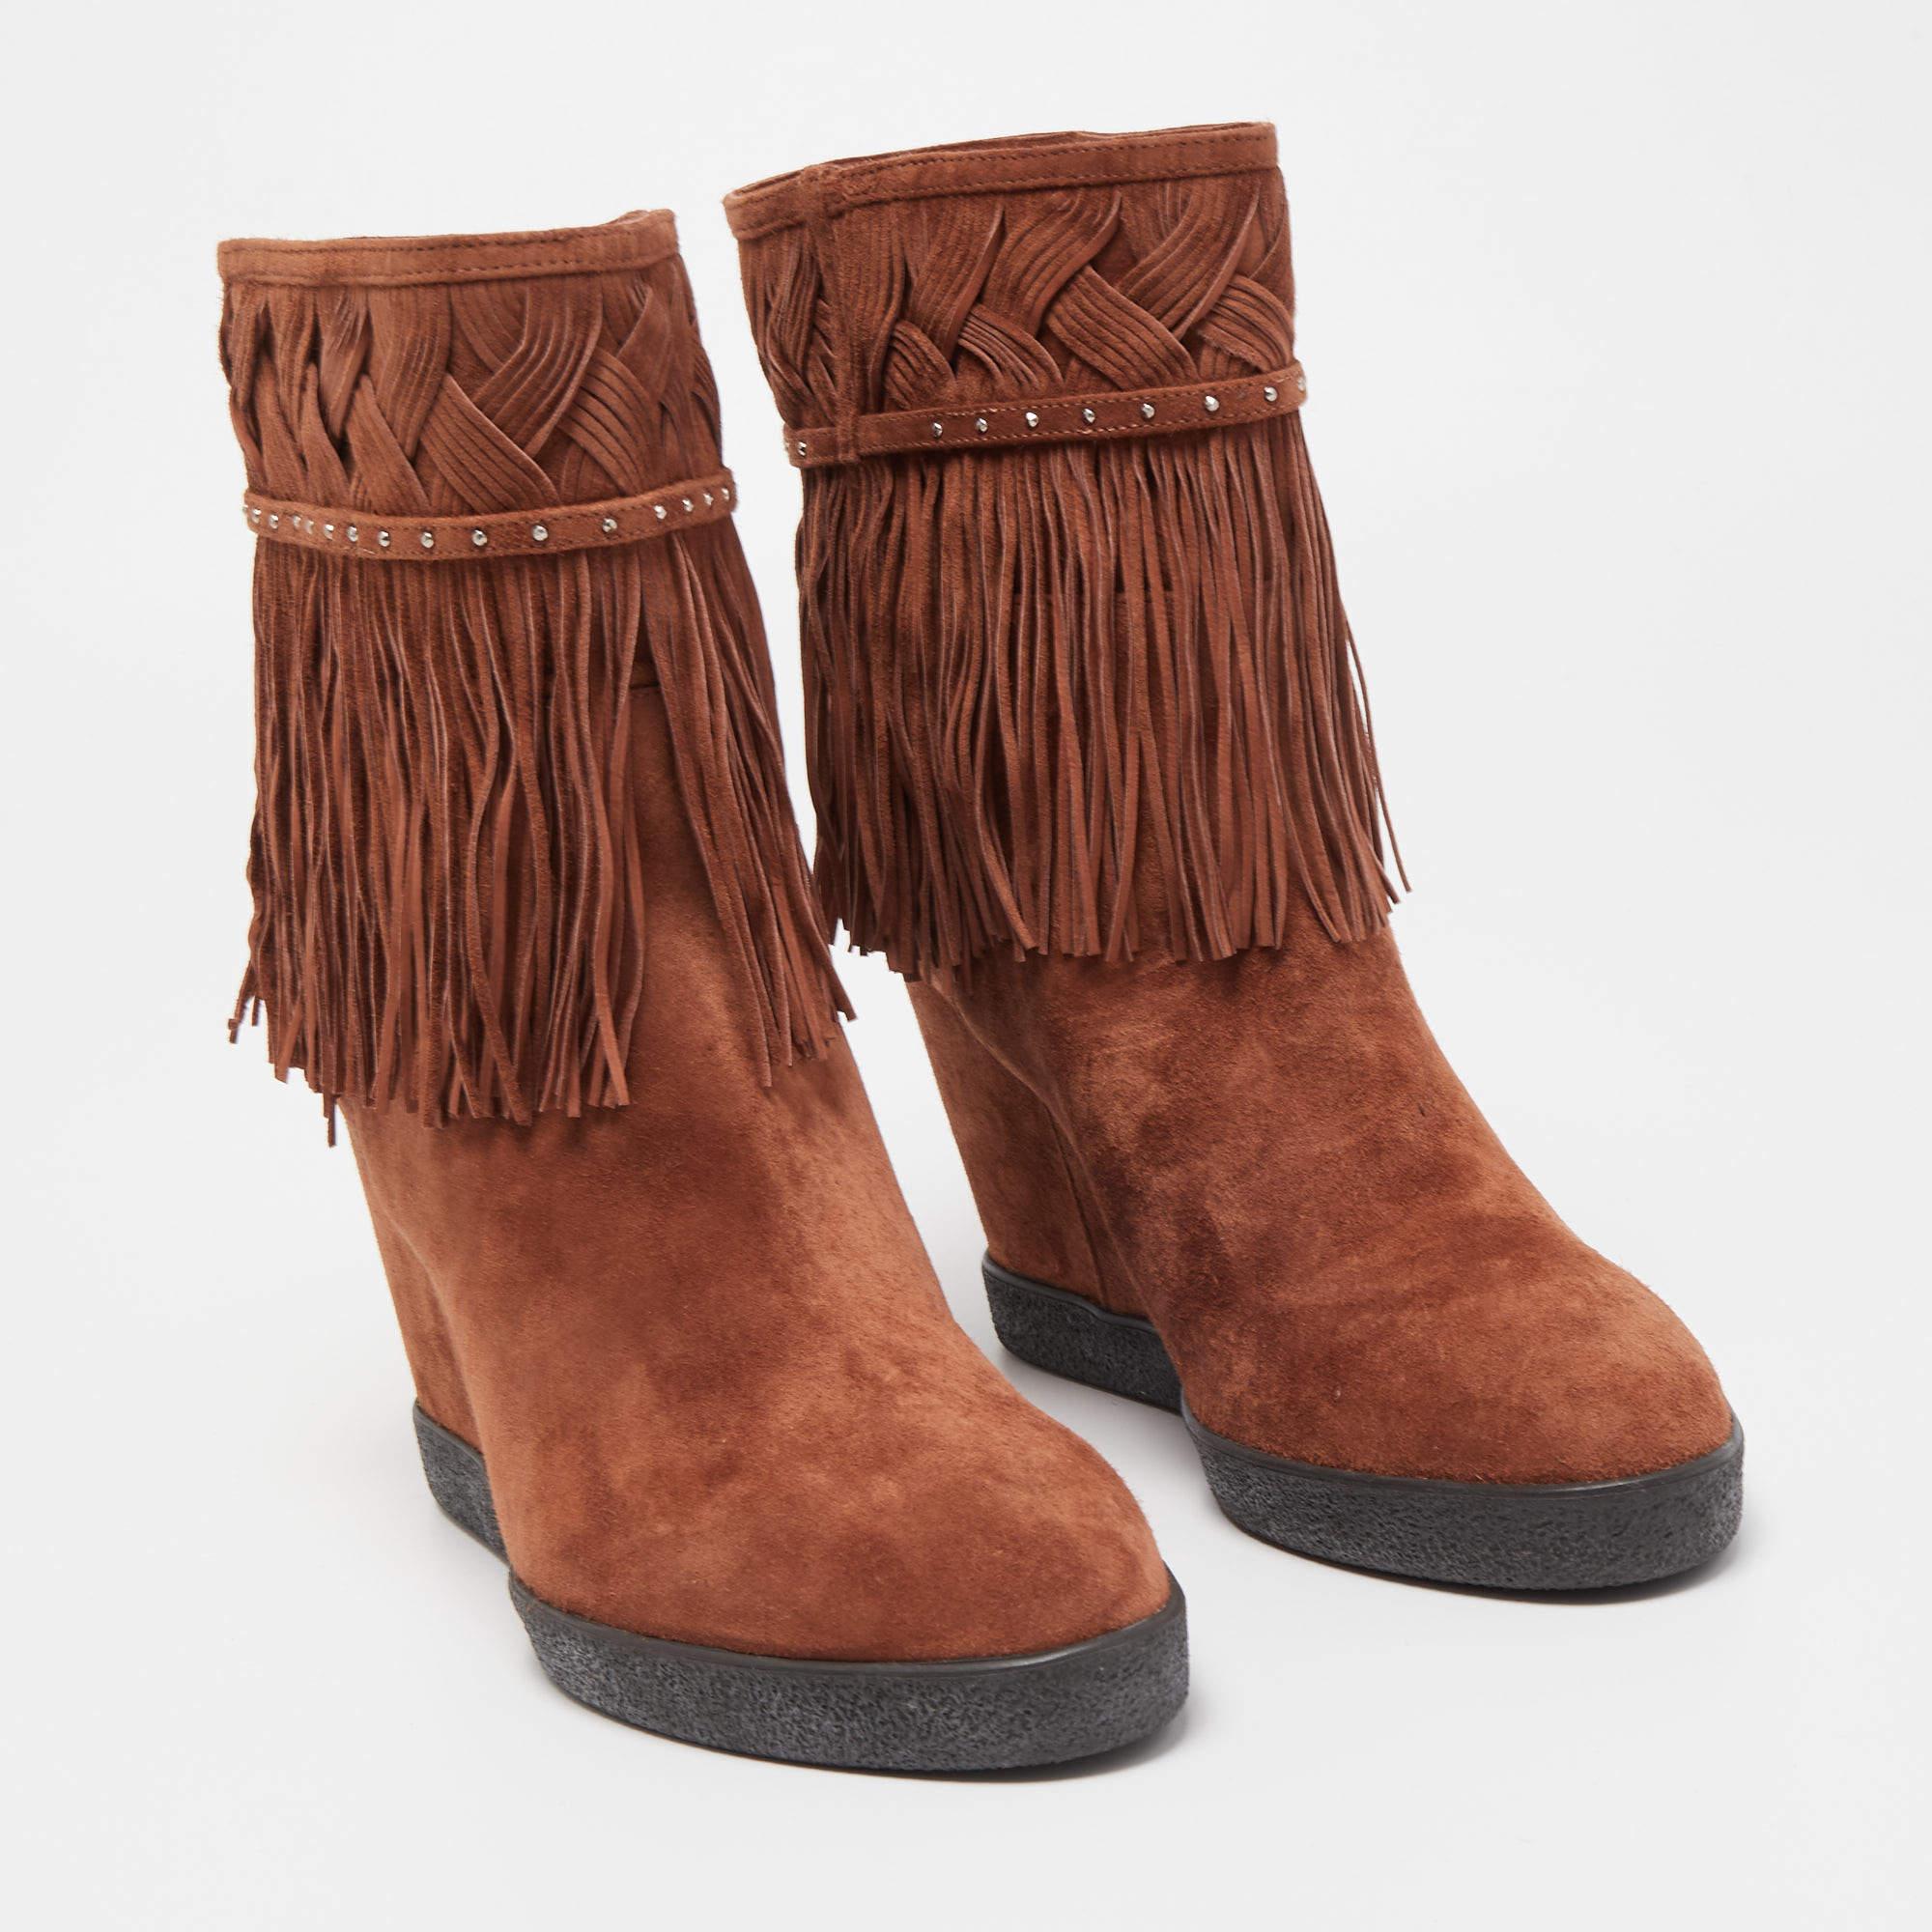 Women's Le Silla Brown Suede Fringe Ankle Boots Size 38